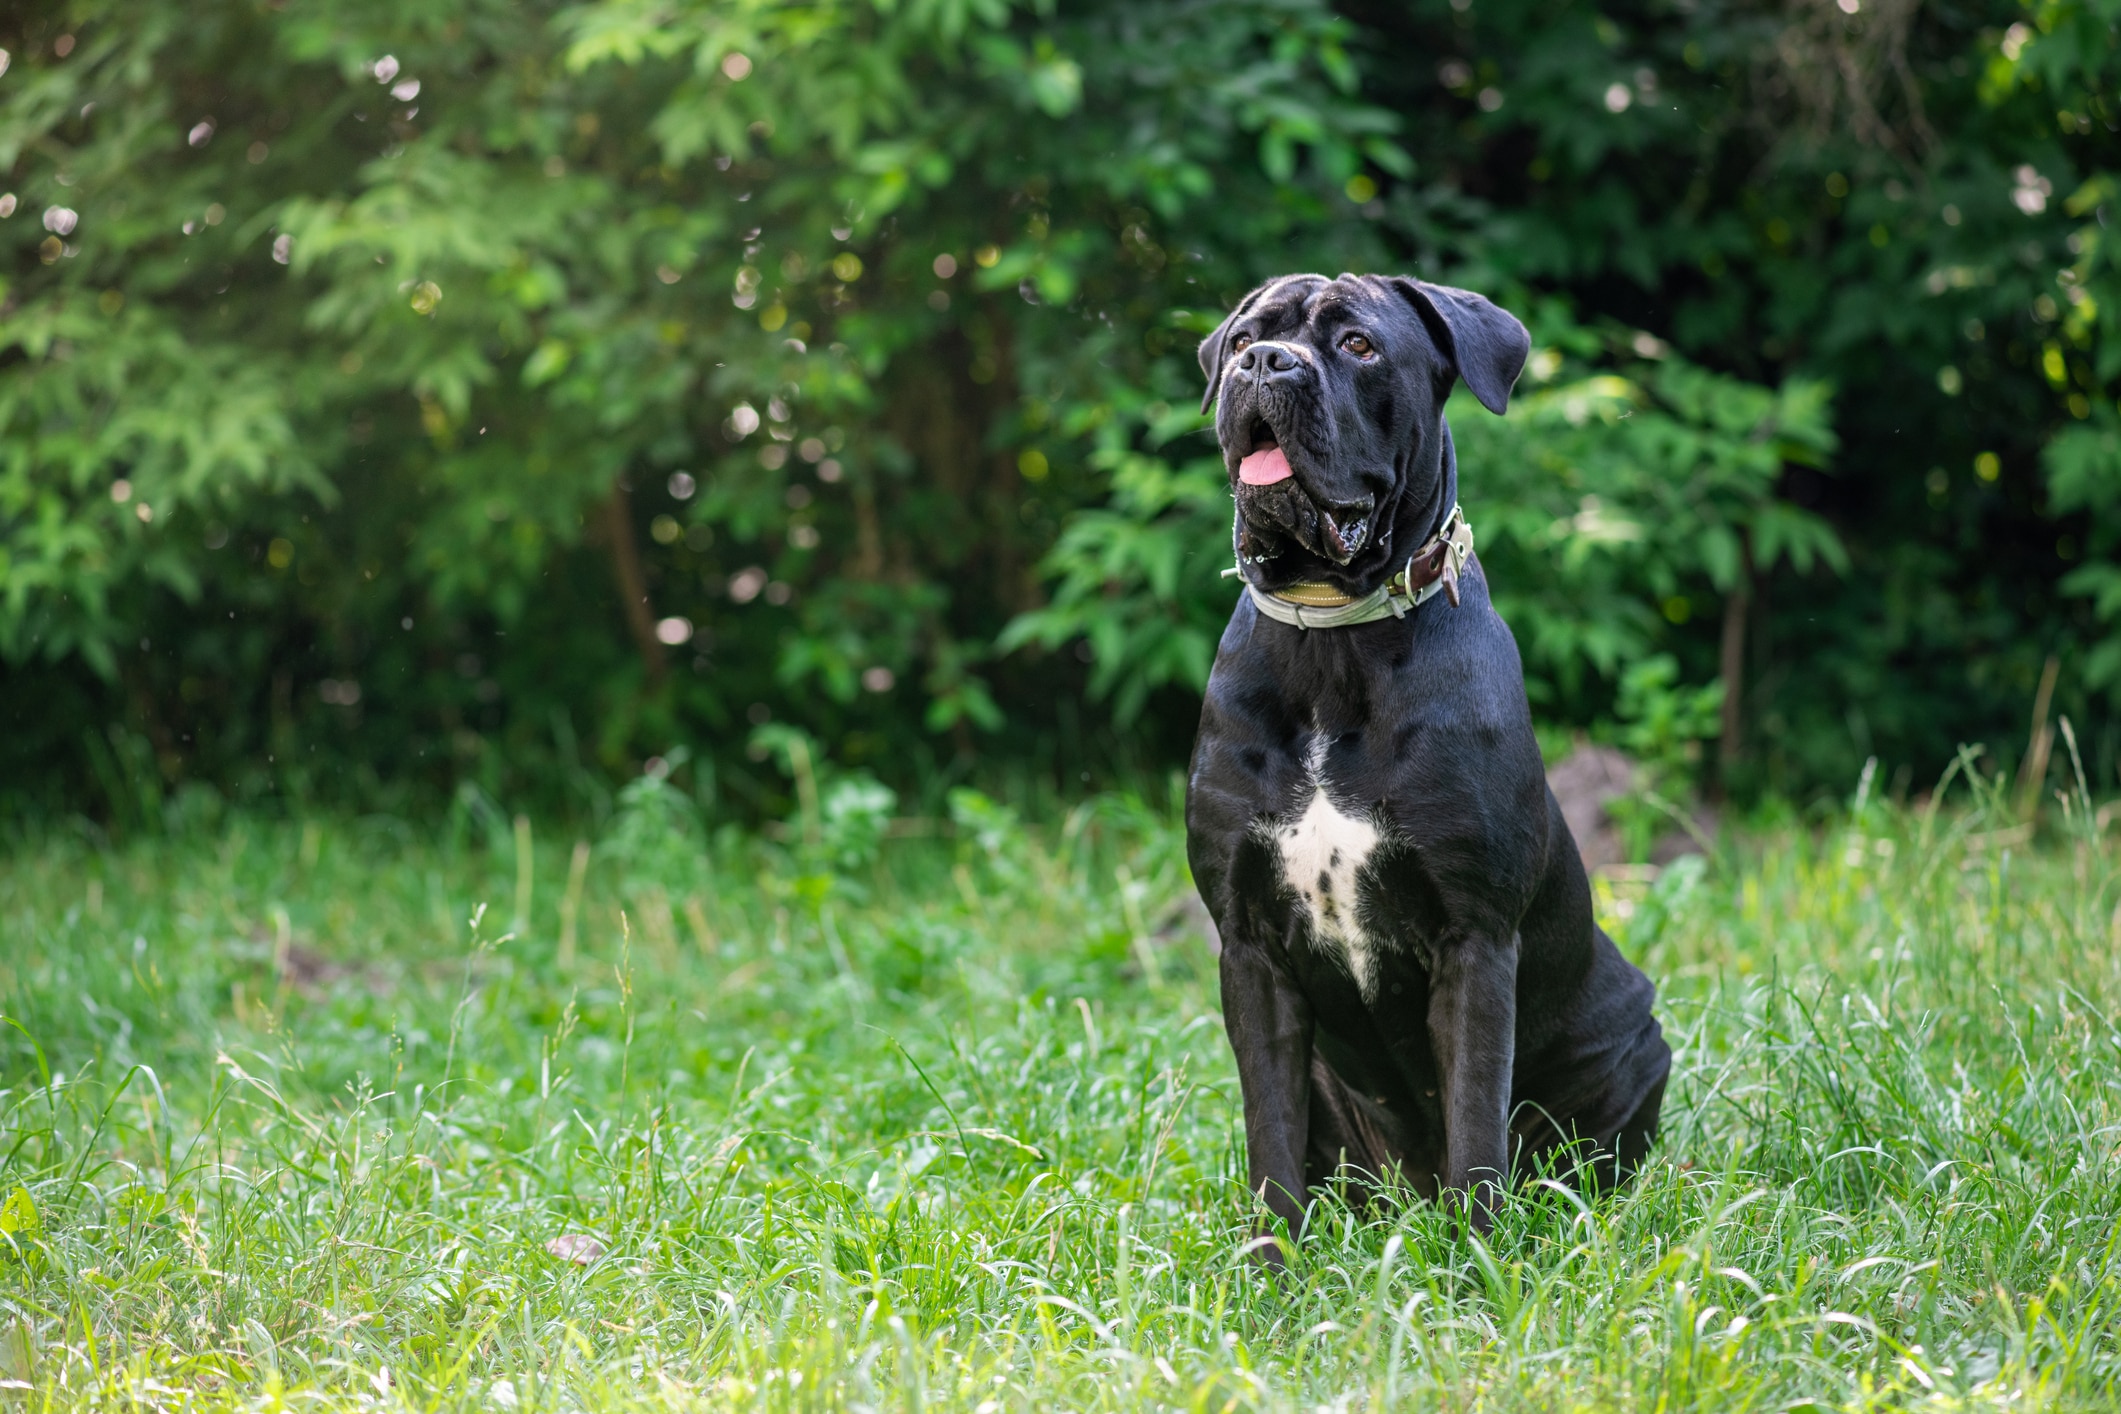 cane corso sitting outside in grass